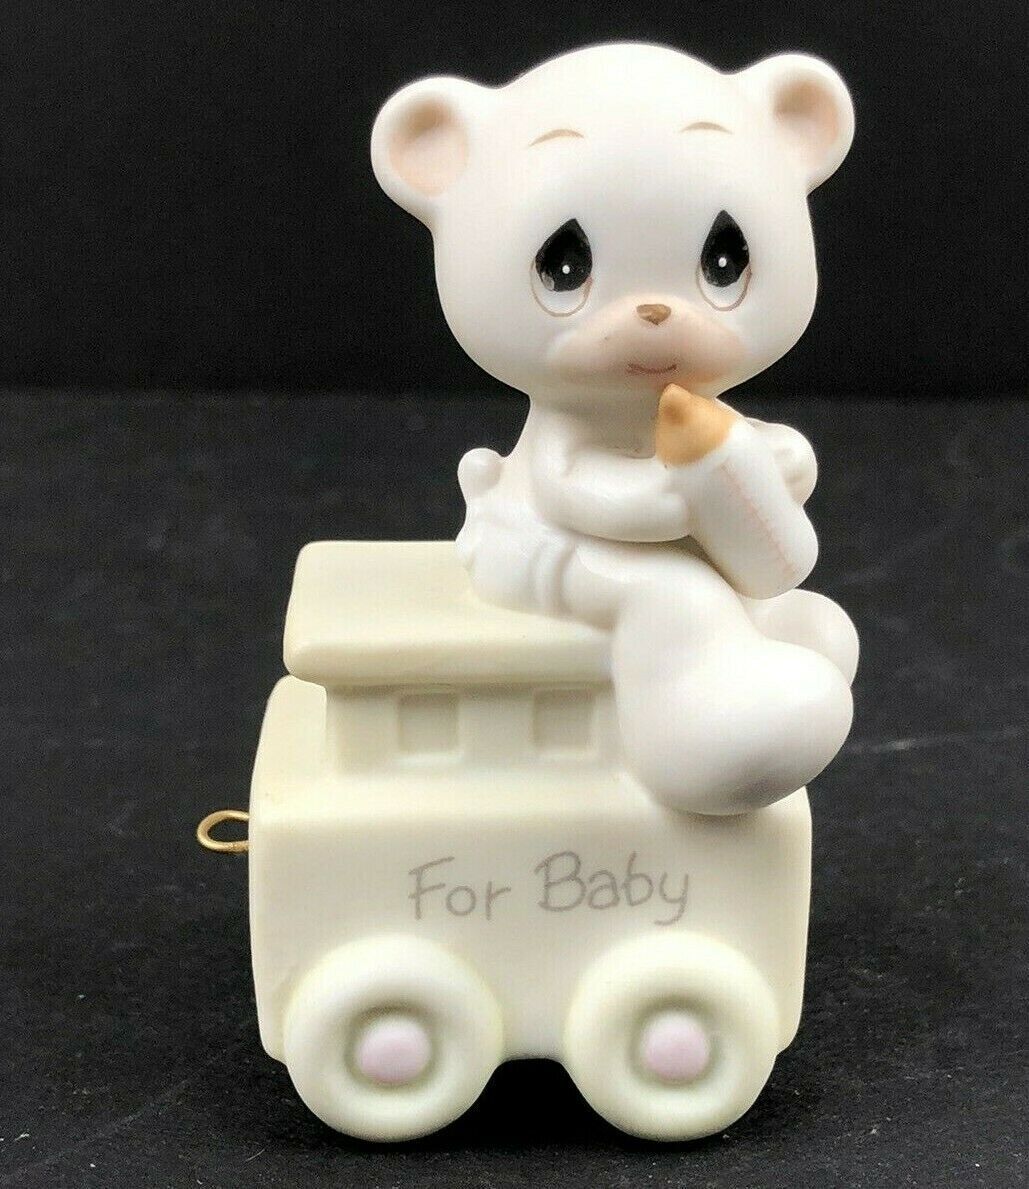 1985 Precious Moments “May Your Birthday be Warm” 15938 For Baby, NO BOX